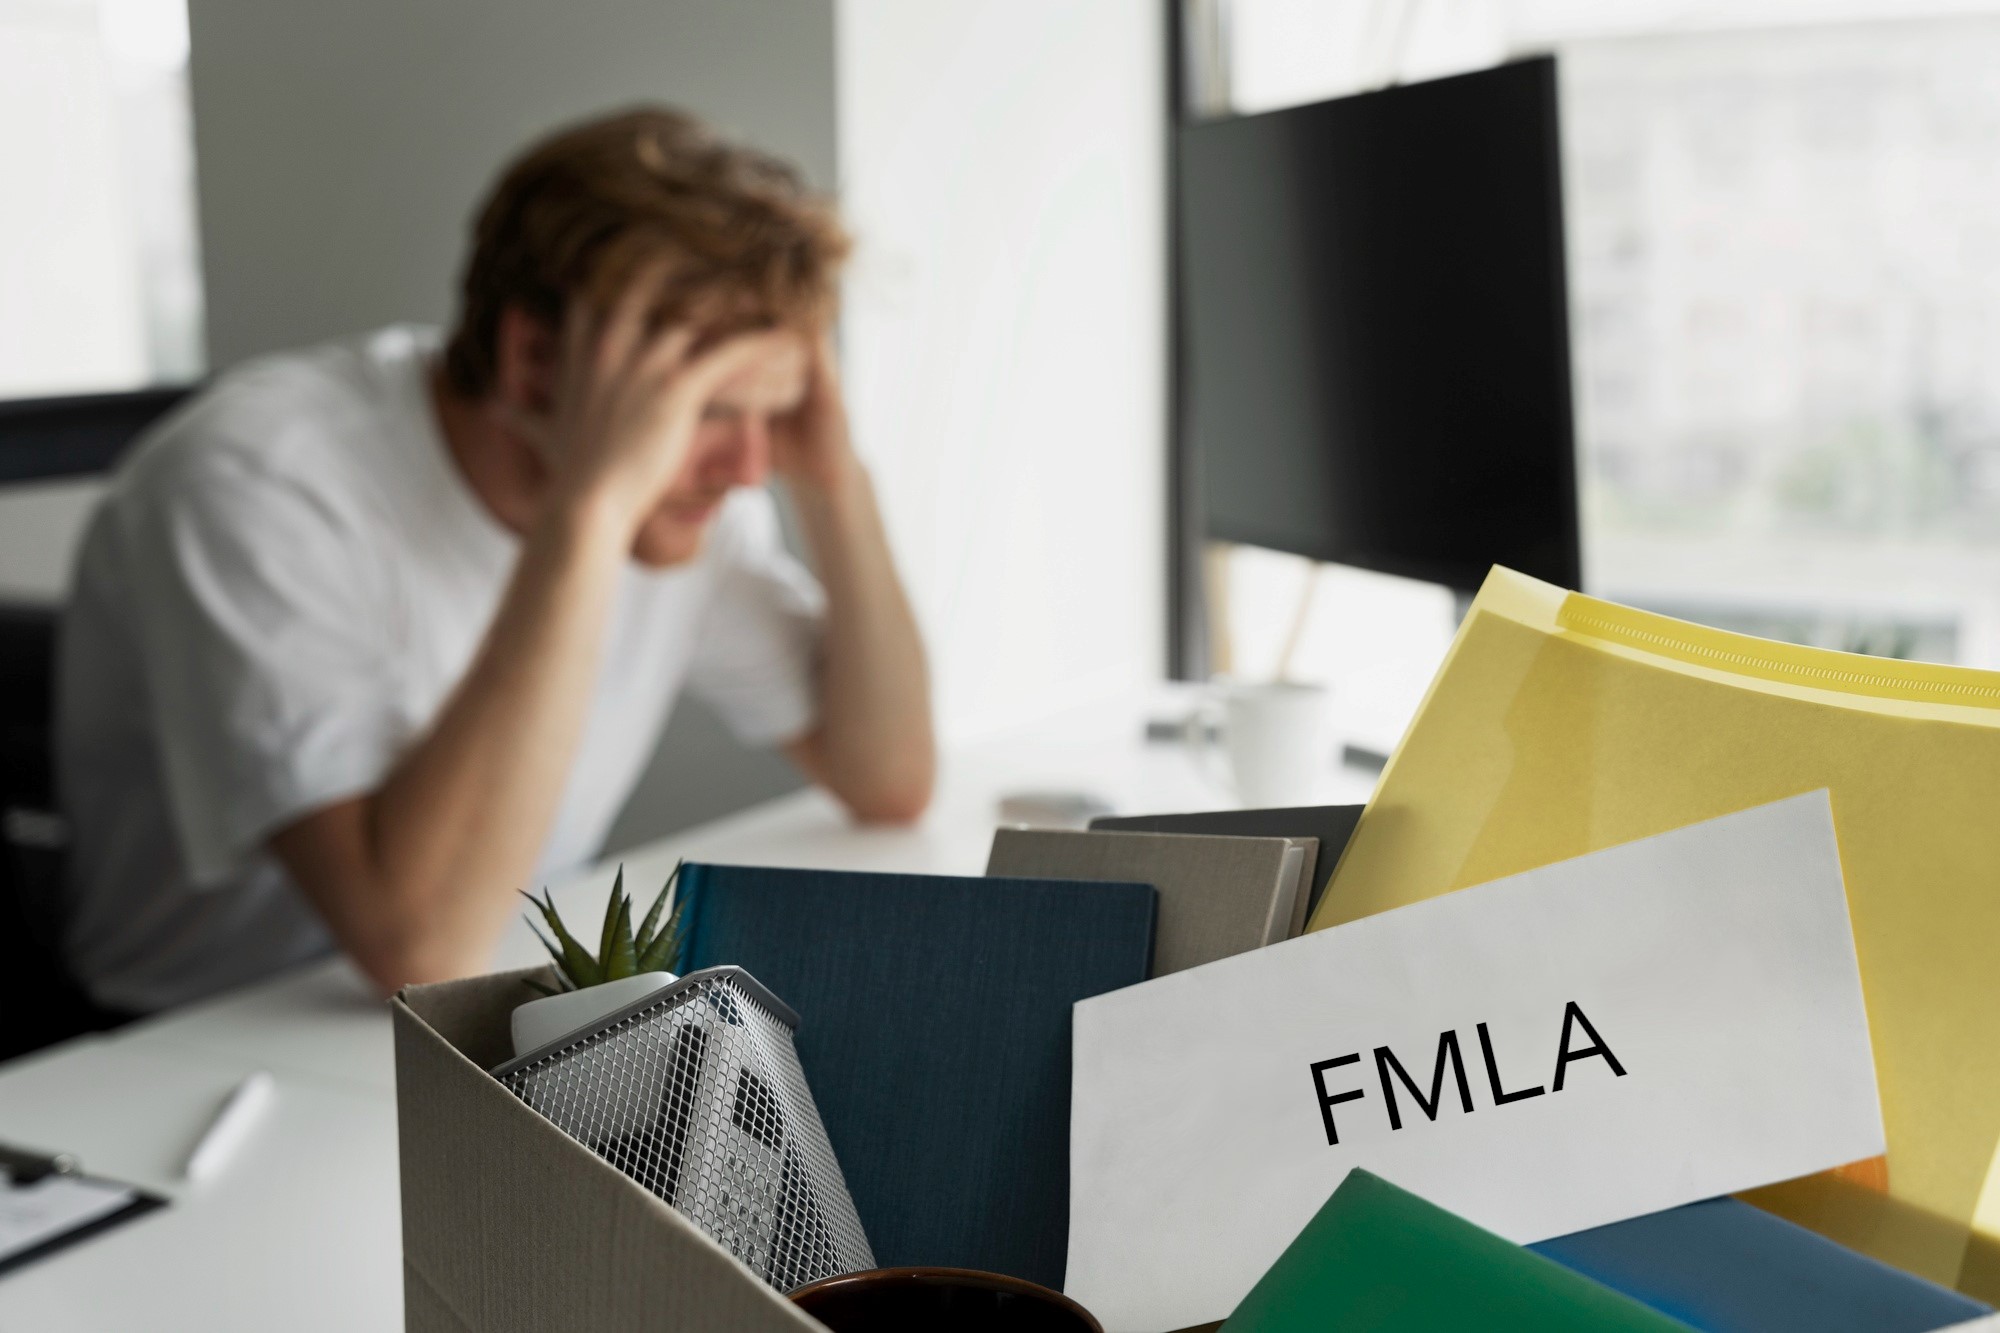 confused man with fmla substance abuse letter